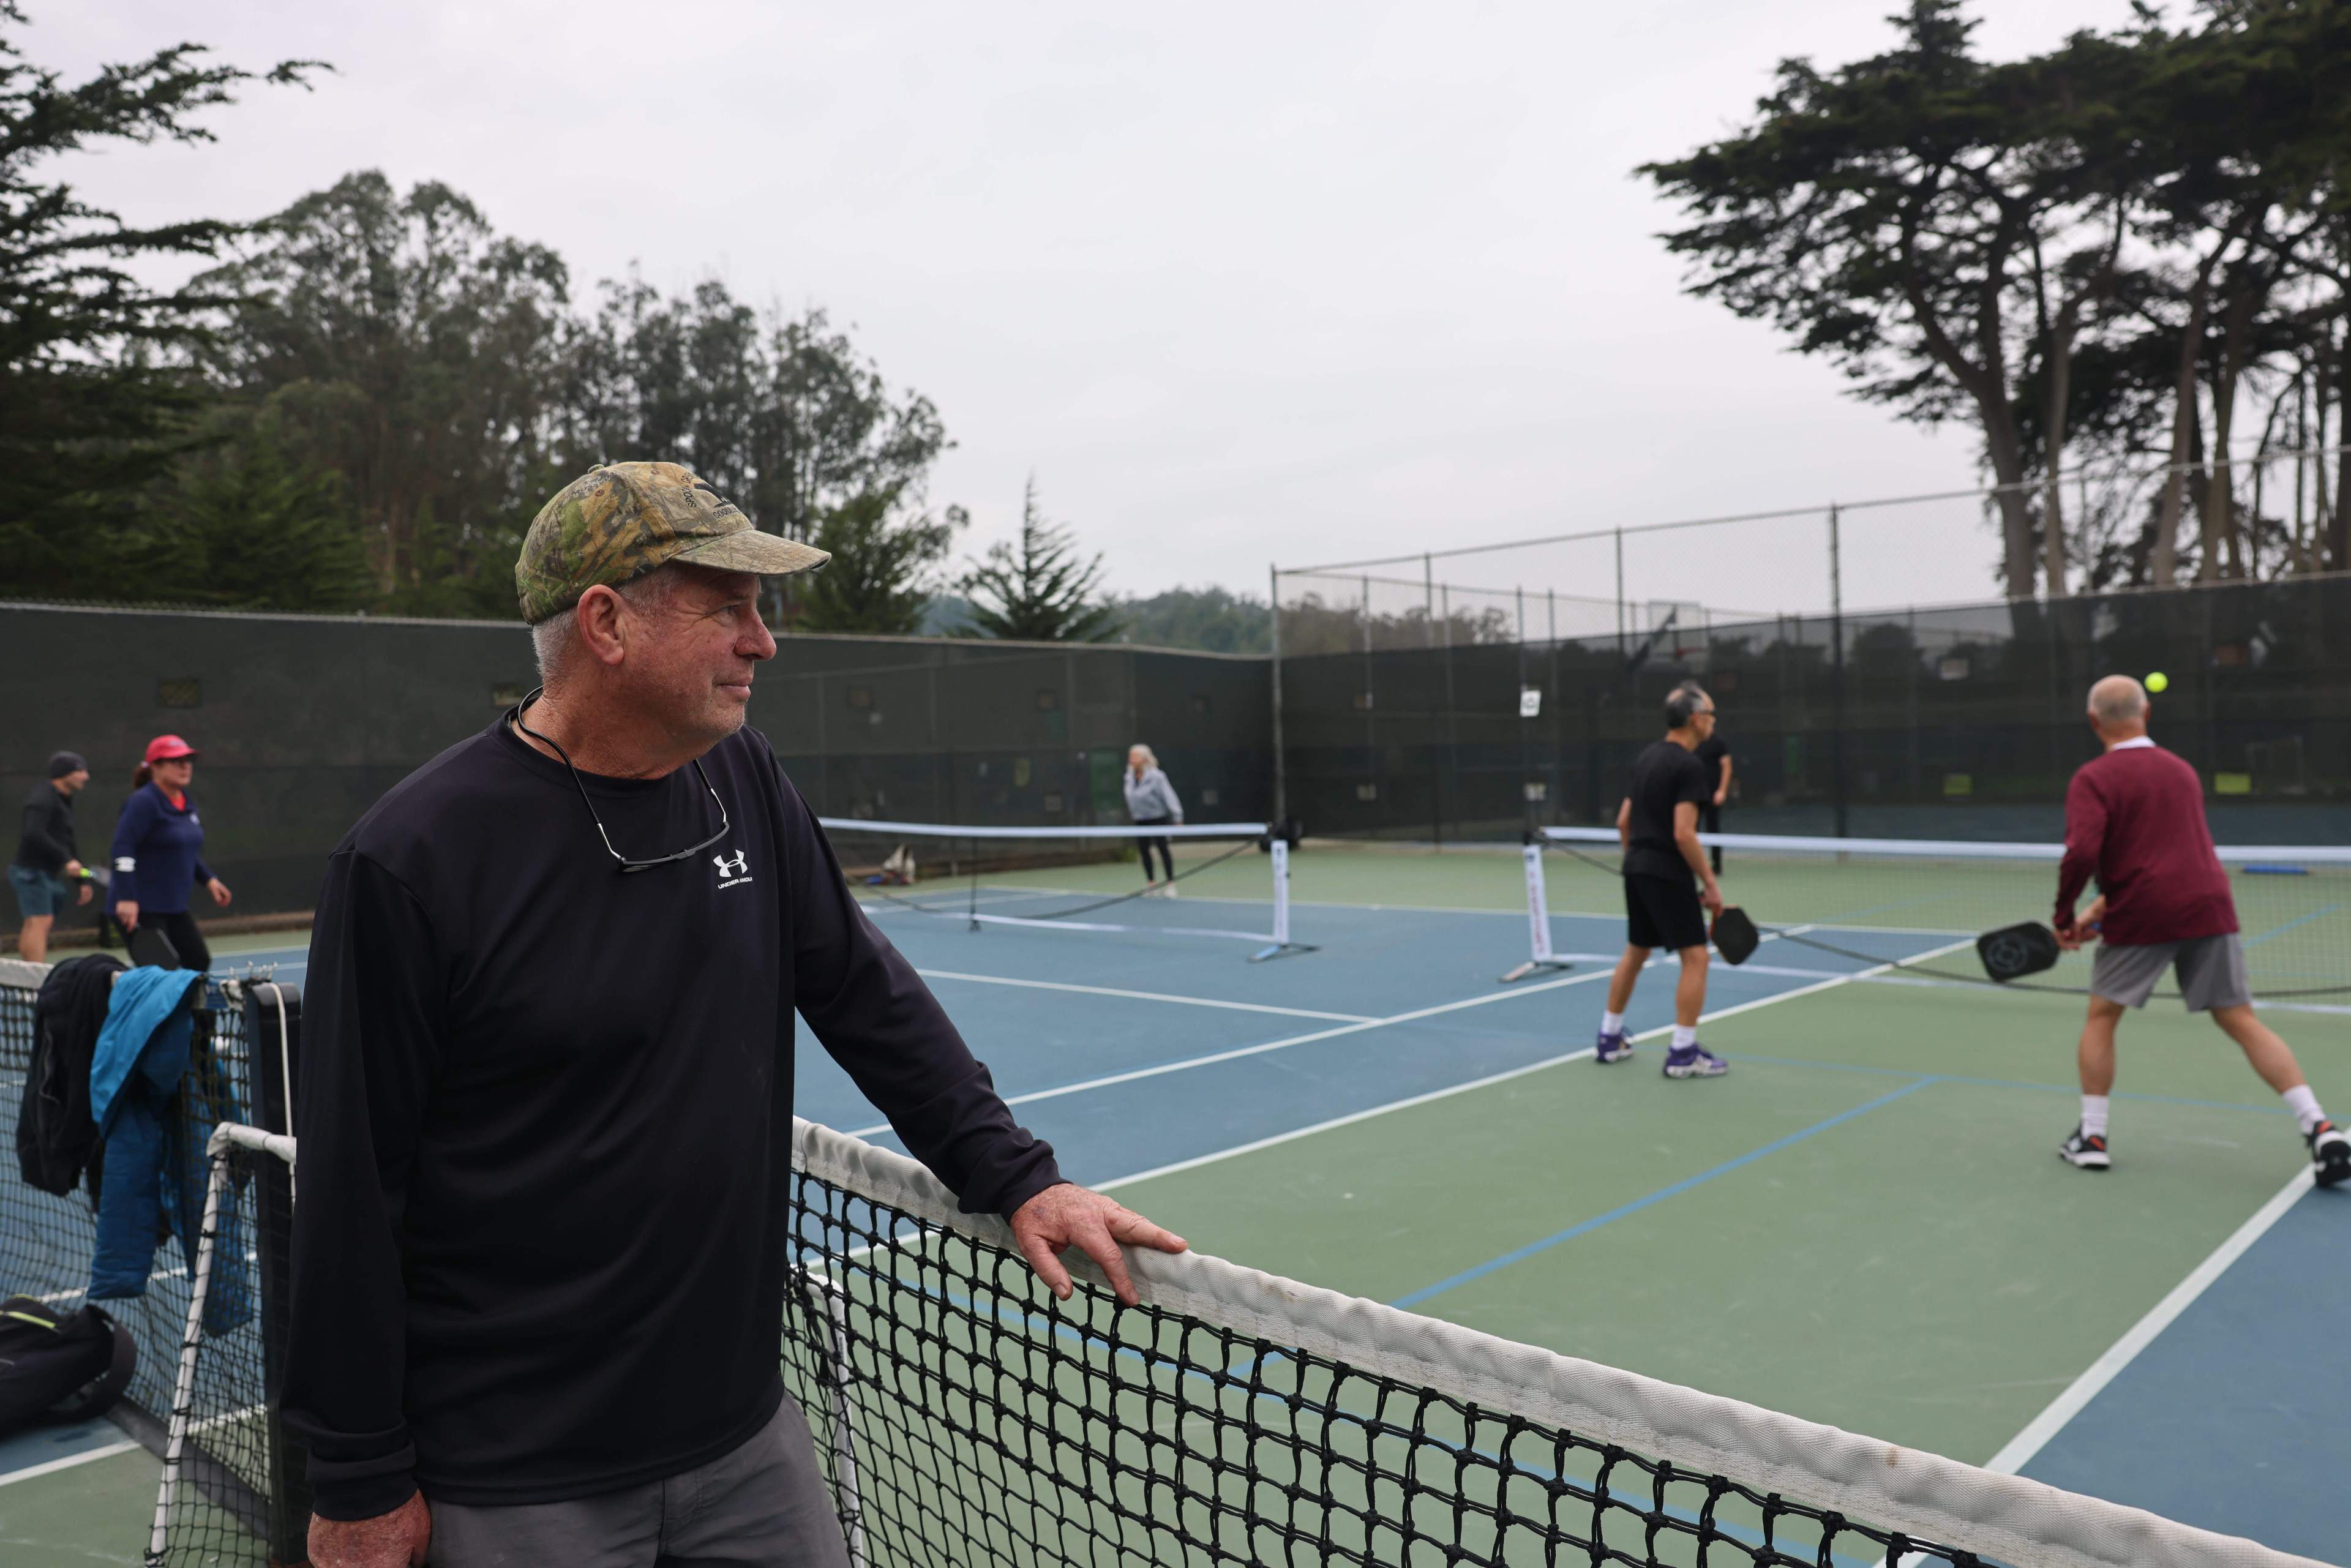 A man leans on a pickleball net, watching others play pickleball on a cloudy day.